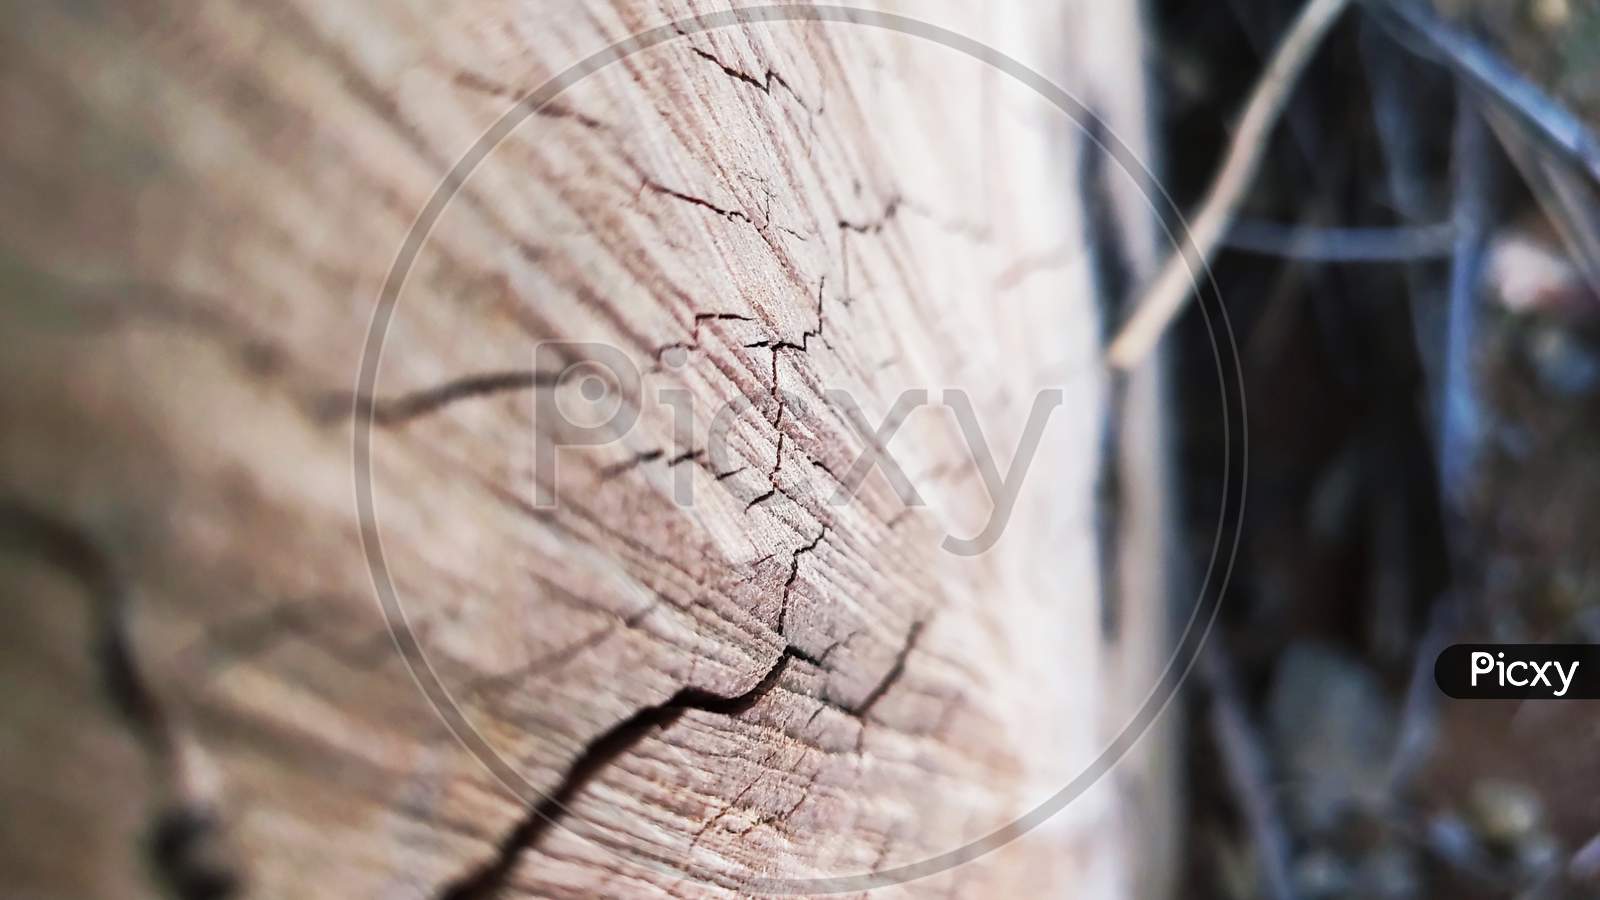 Crack marks on wooden surface